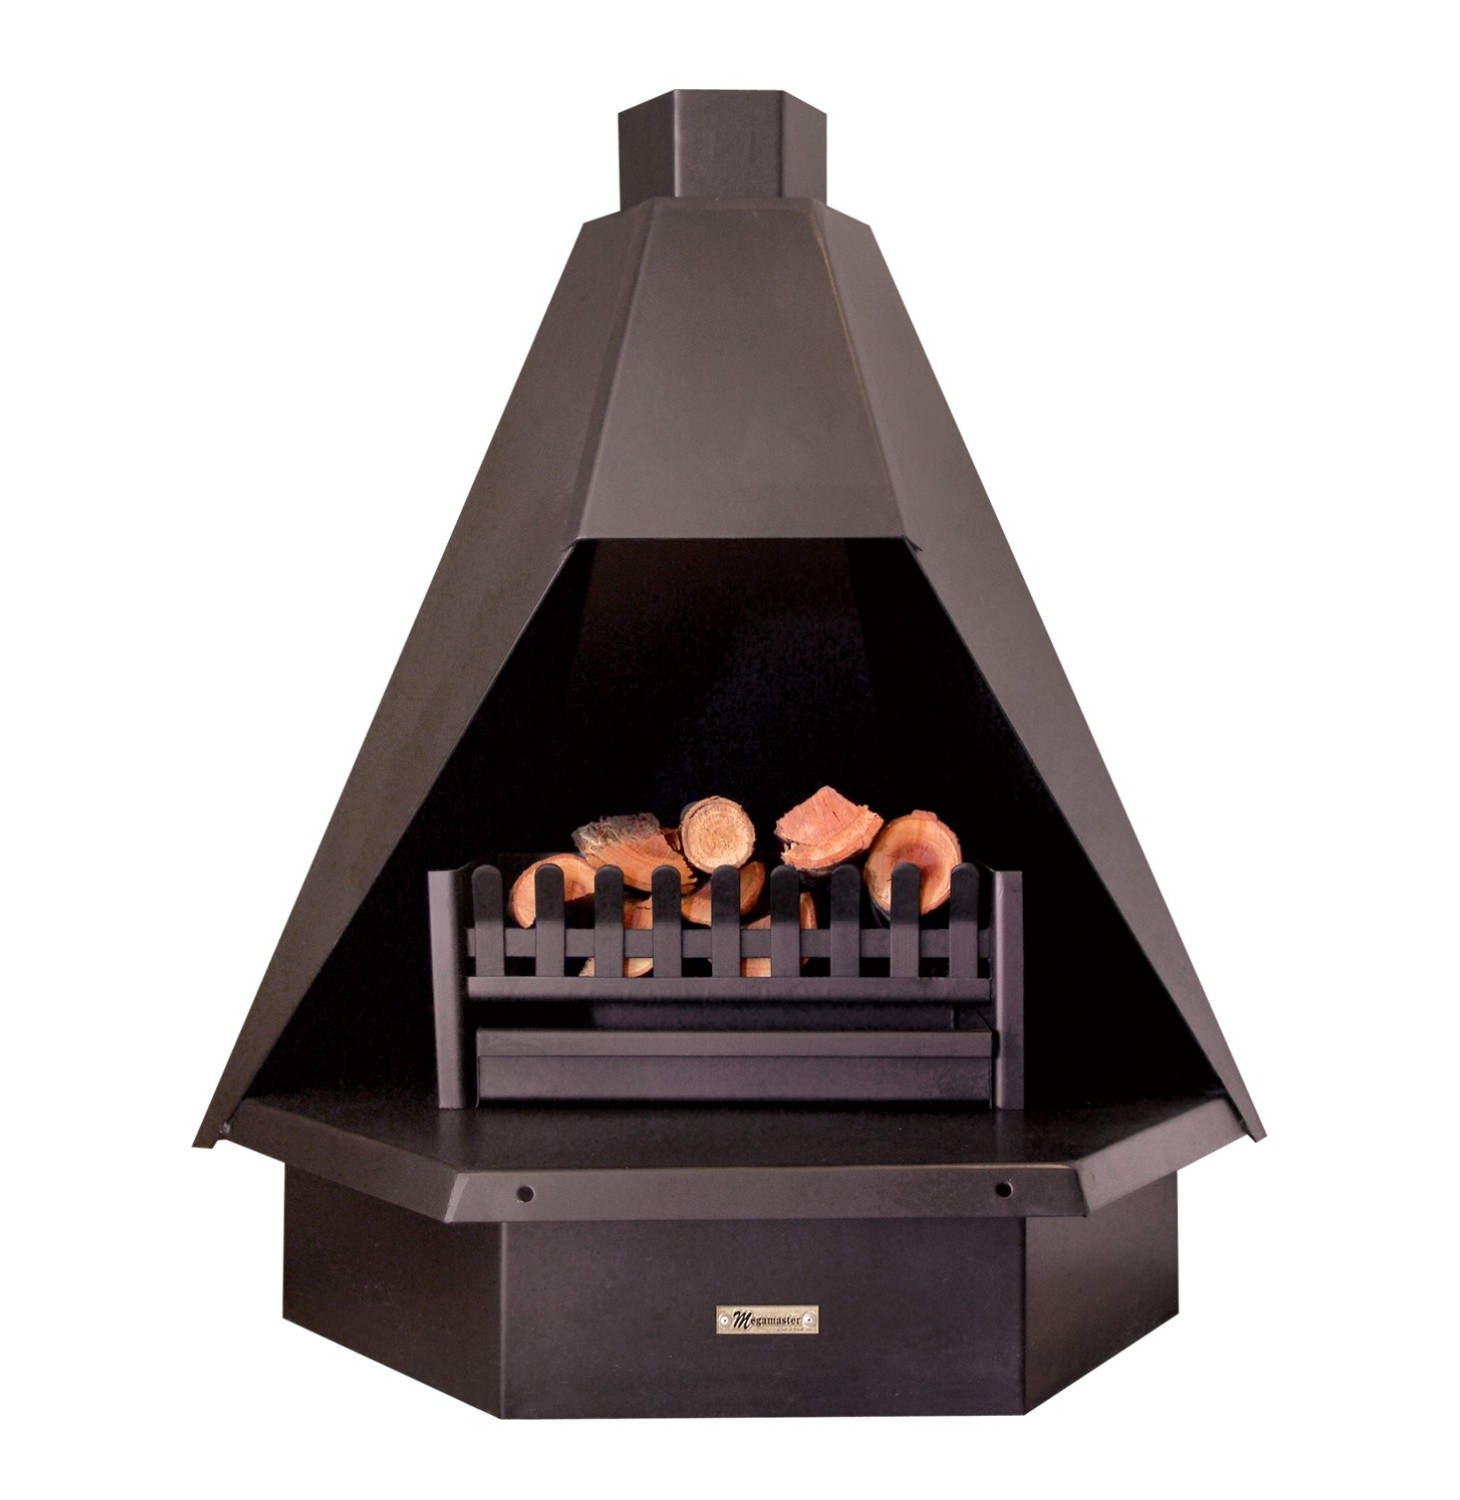 Megamaster 800 Hex Premia Free Standing Fireplace